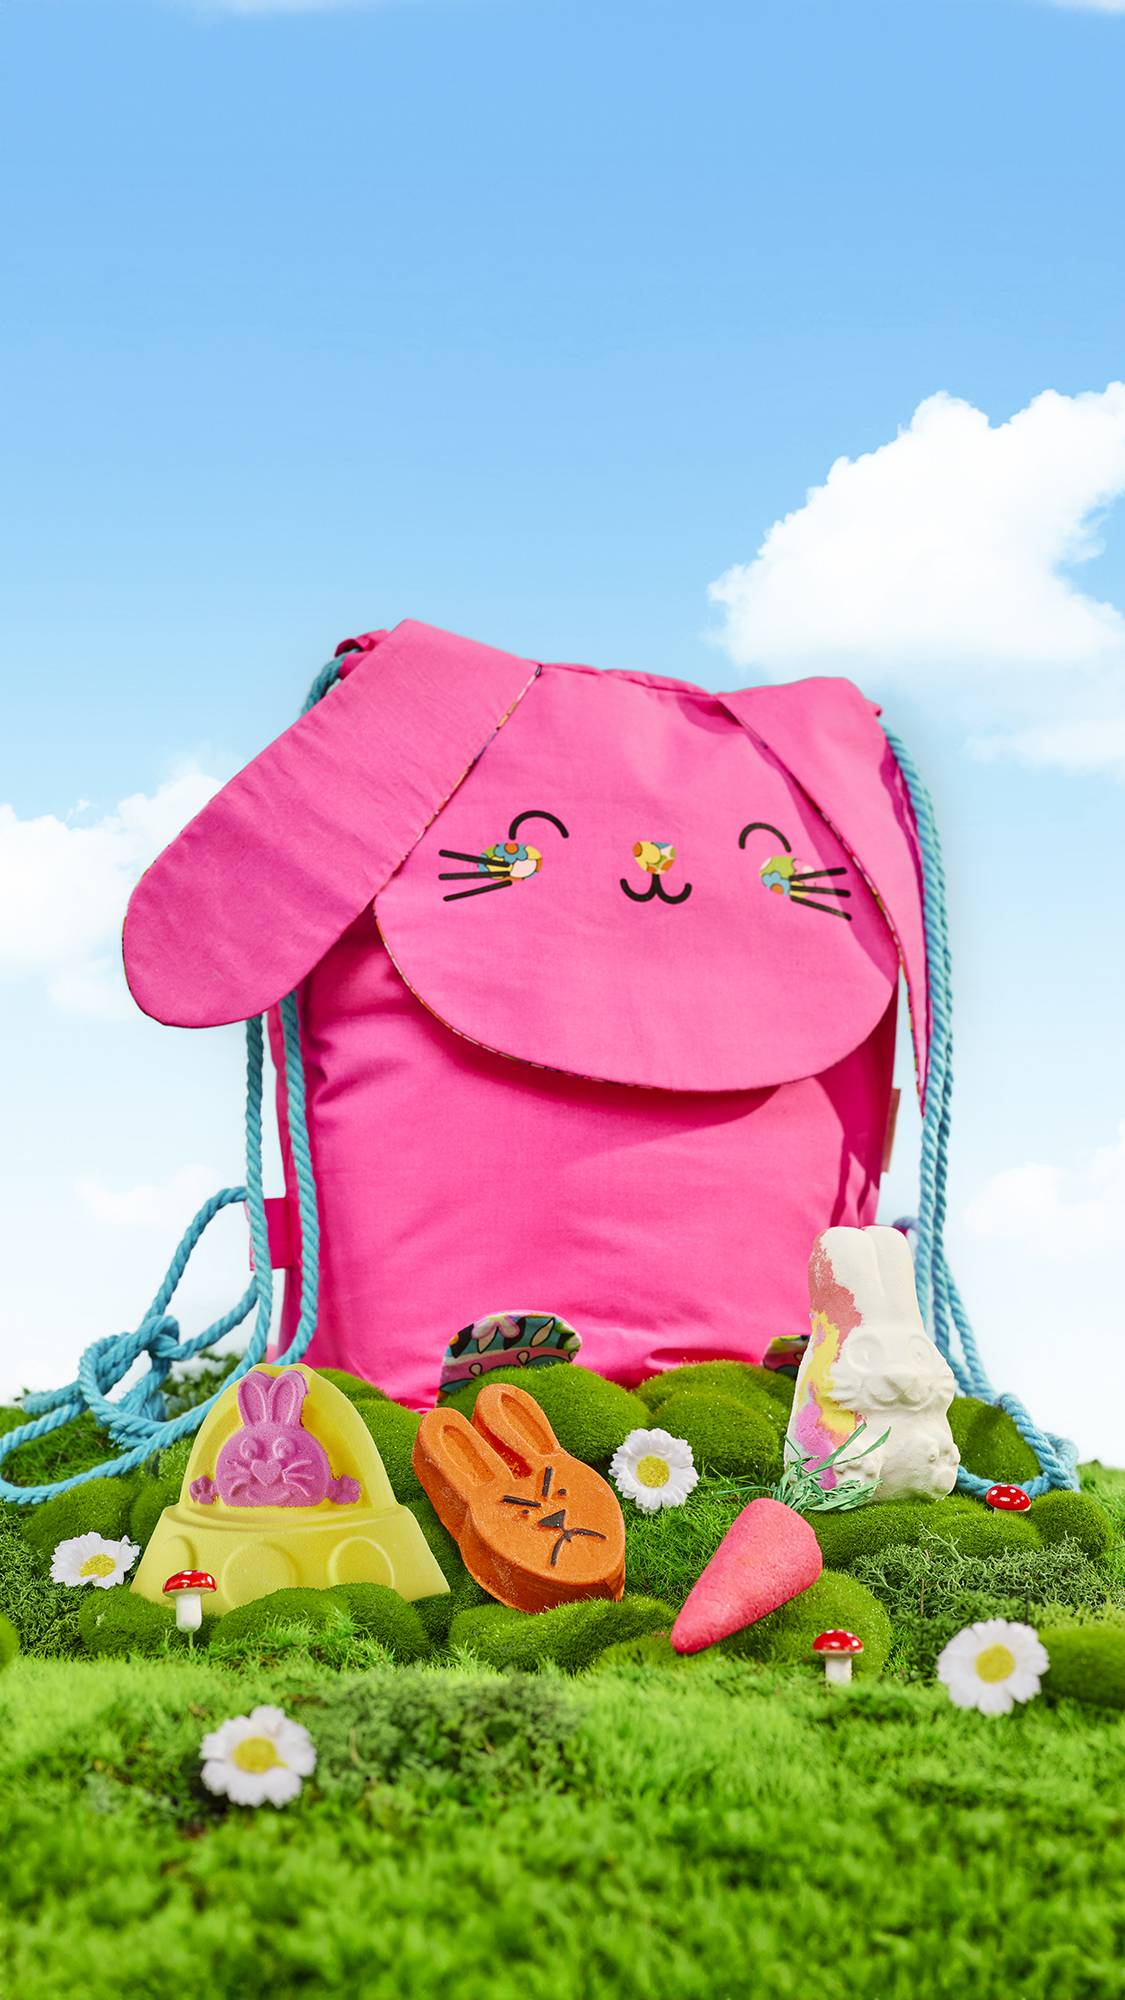 Flower Bunny. A gift consisting of a bright pink, rabbit-shaped, reusable backpack with four Easter-themed bath products laid in front.